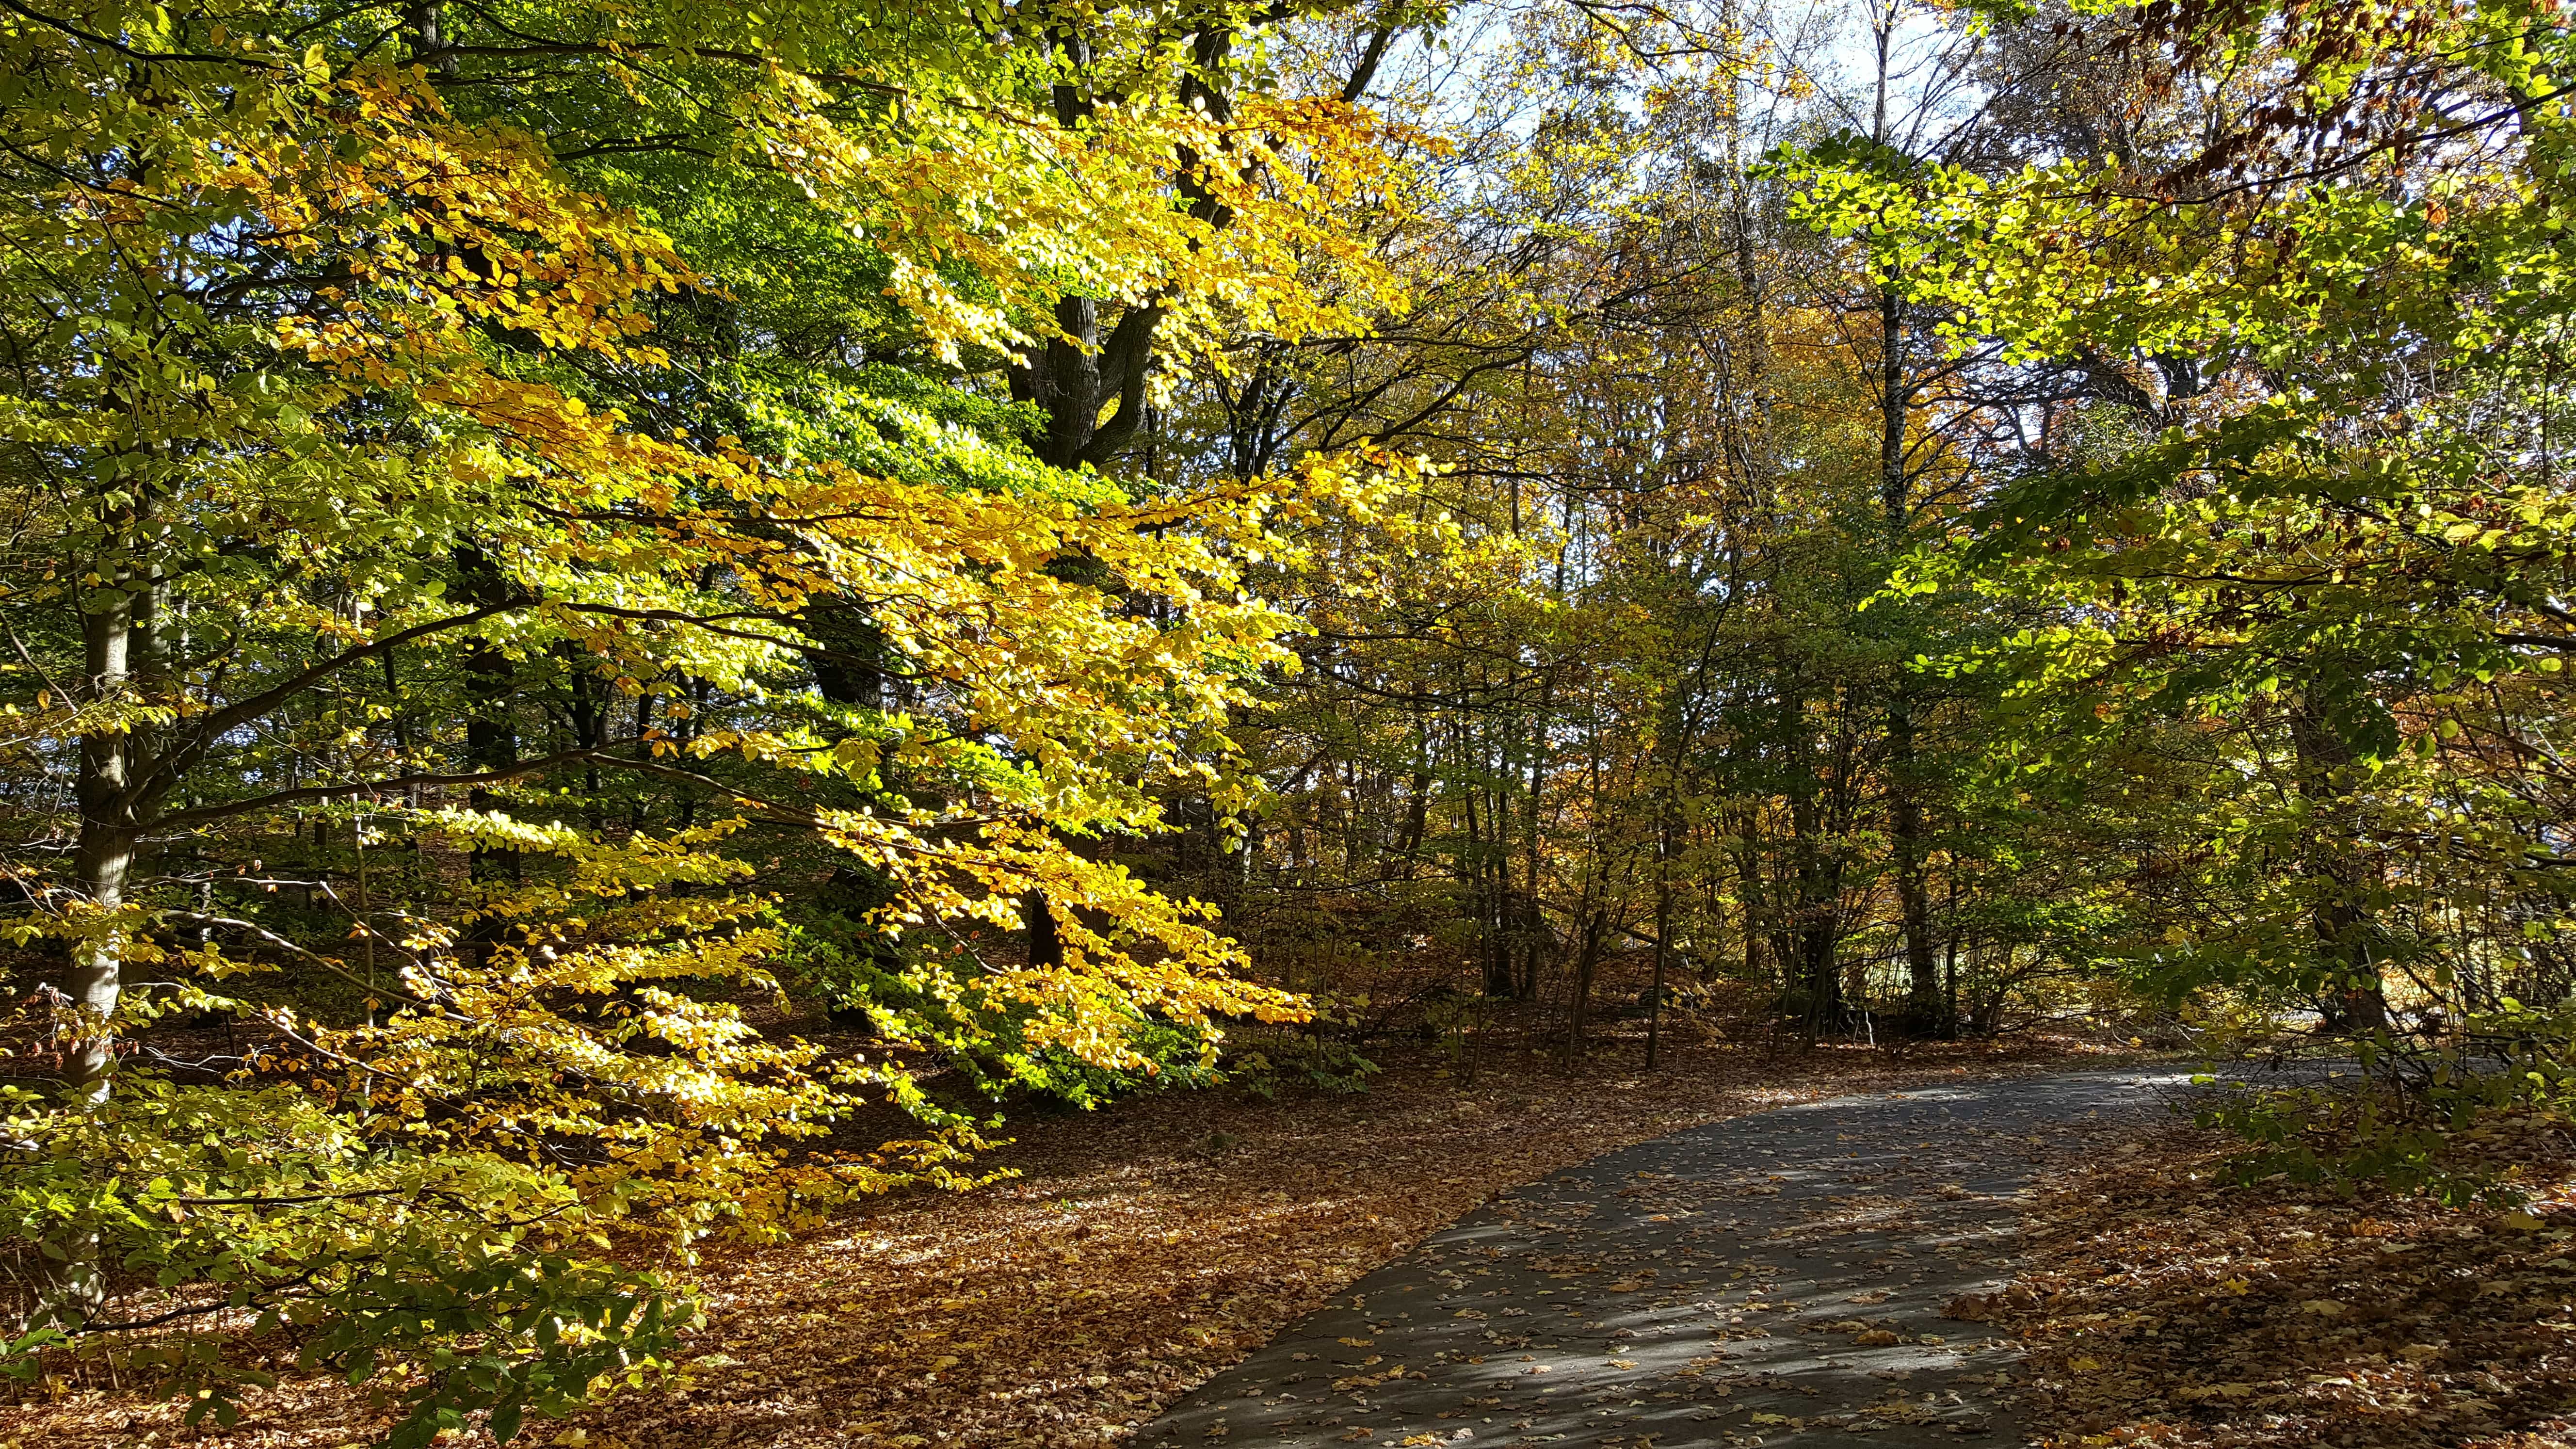 Free picture: autumn season, countryside, forest road